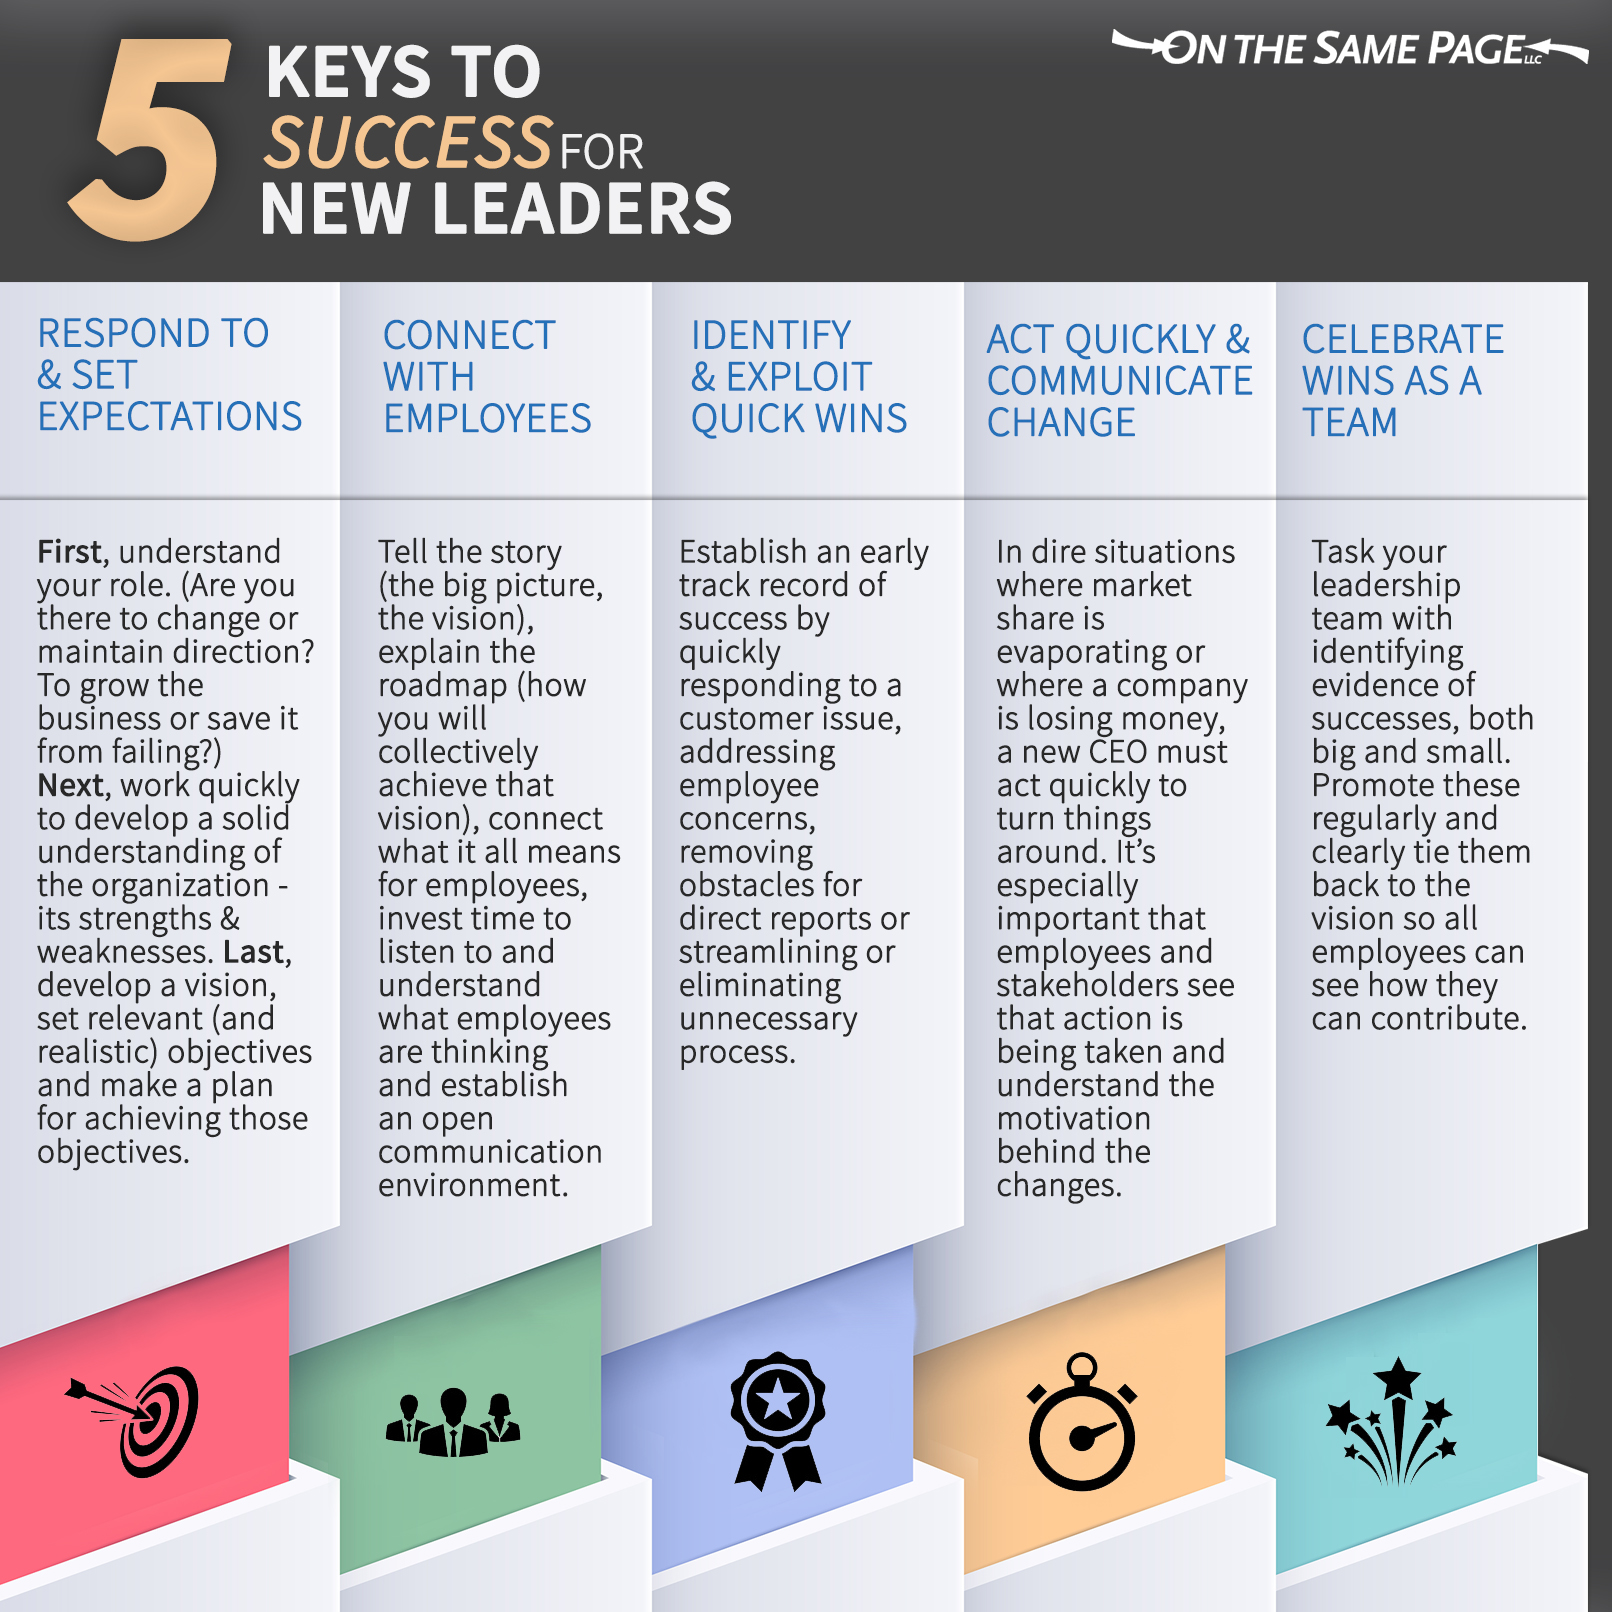 Tips for New Leaders